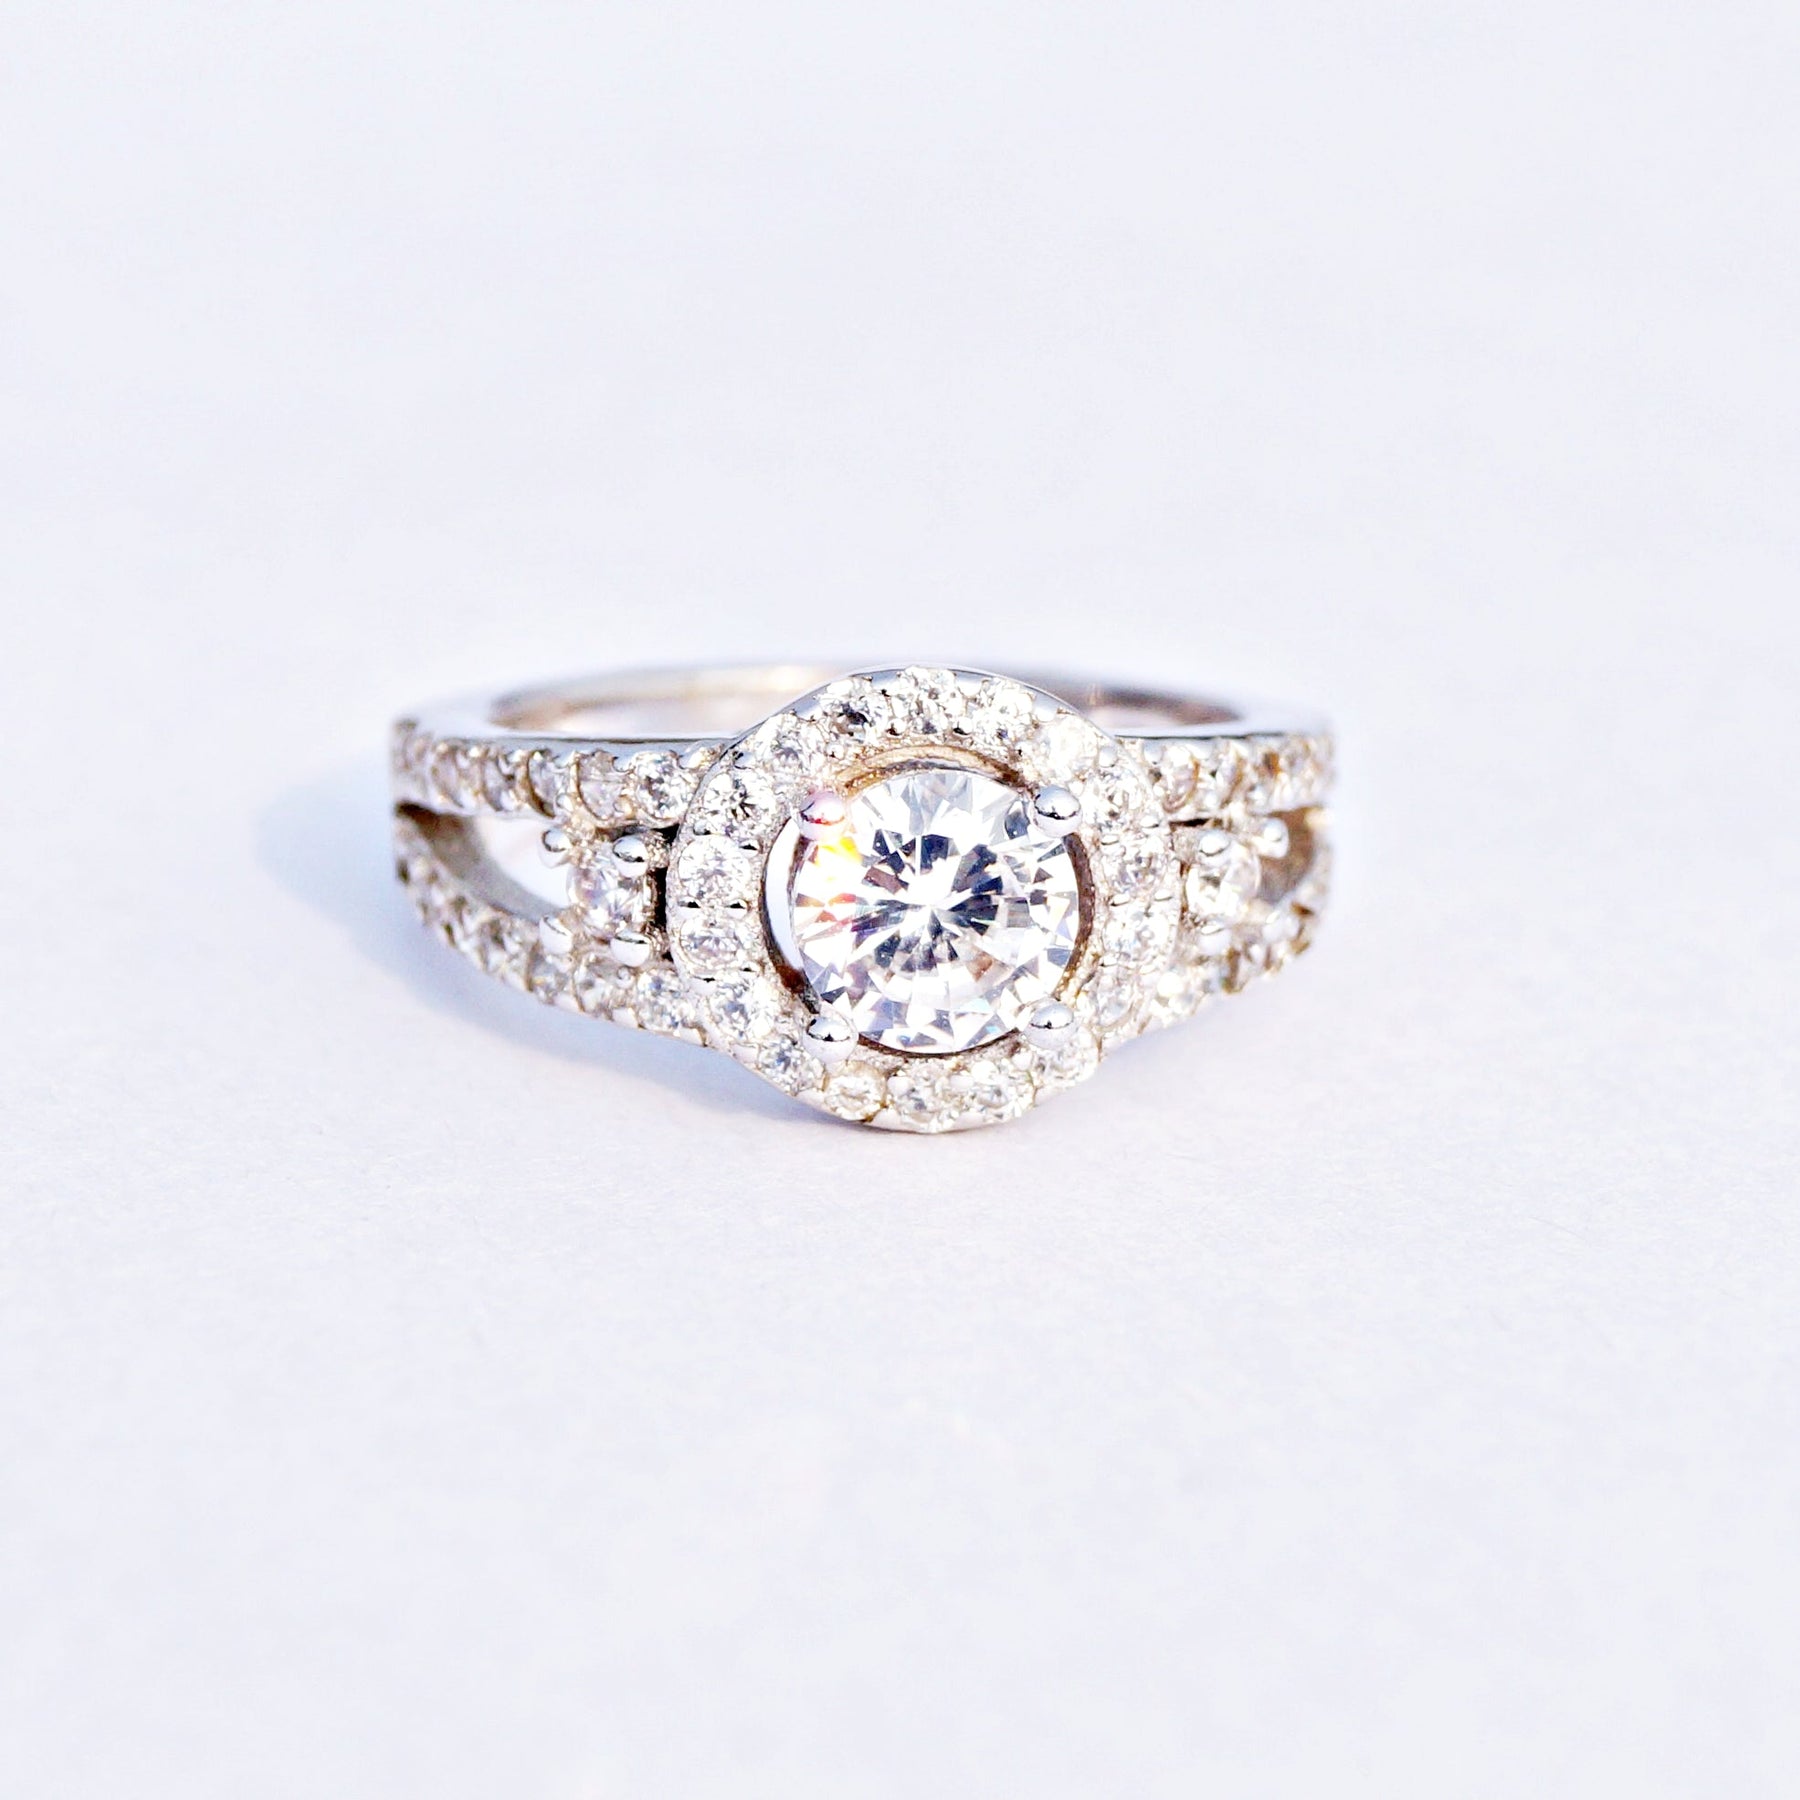 The Halo Solitaire with Double Accent Cz Ring